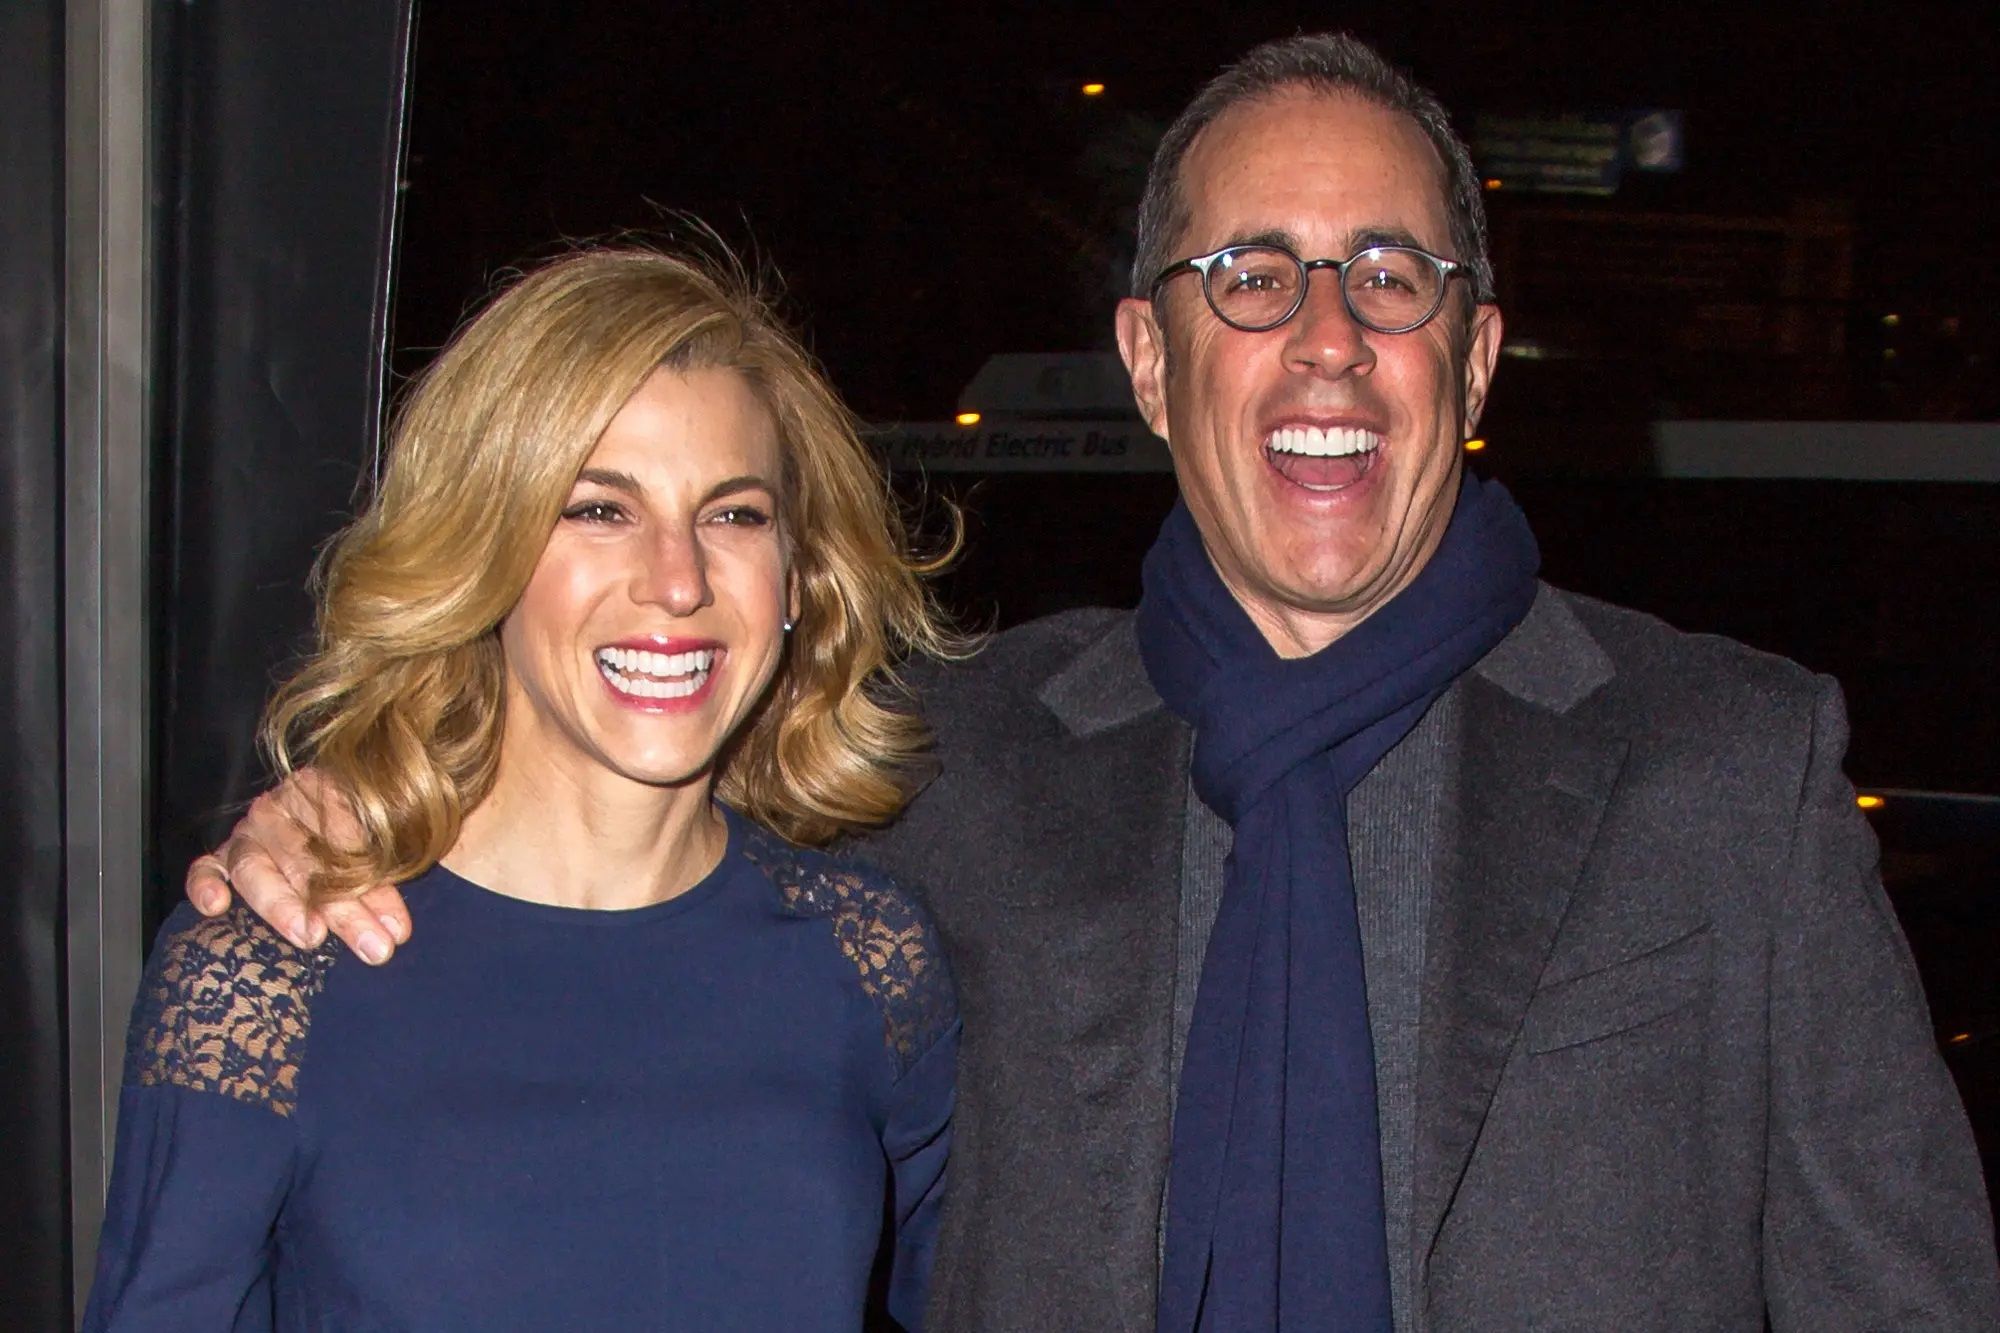 jerry with wife Jessica Seinfeld